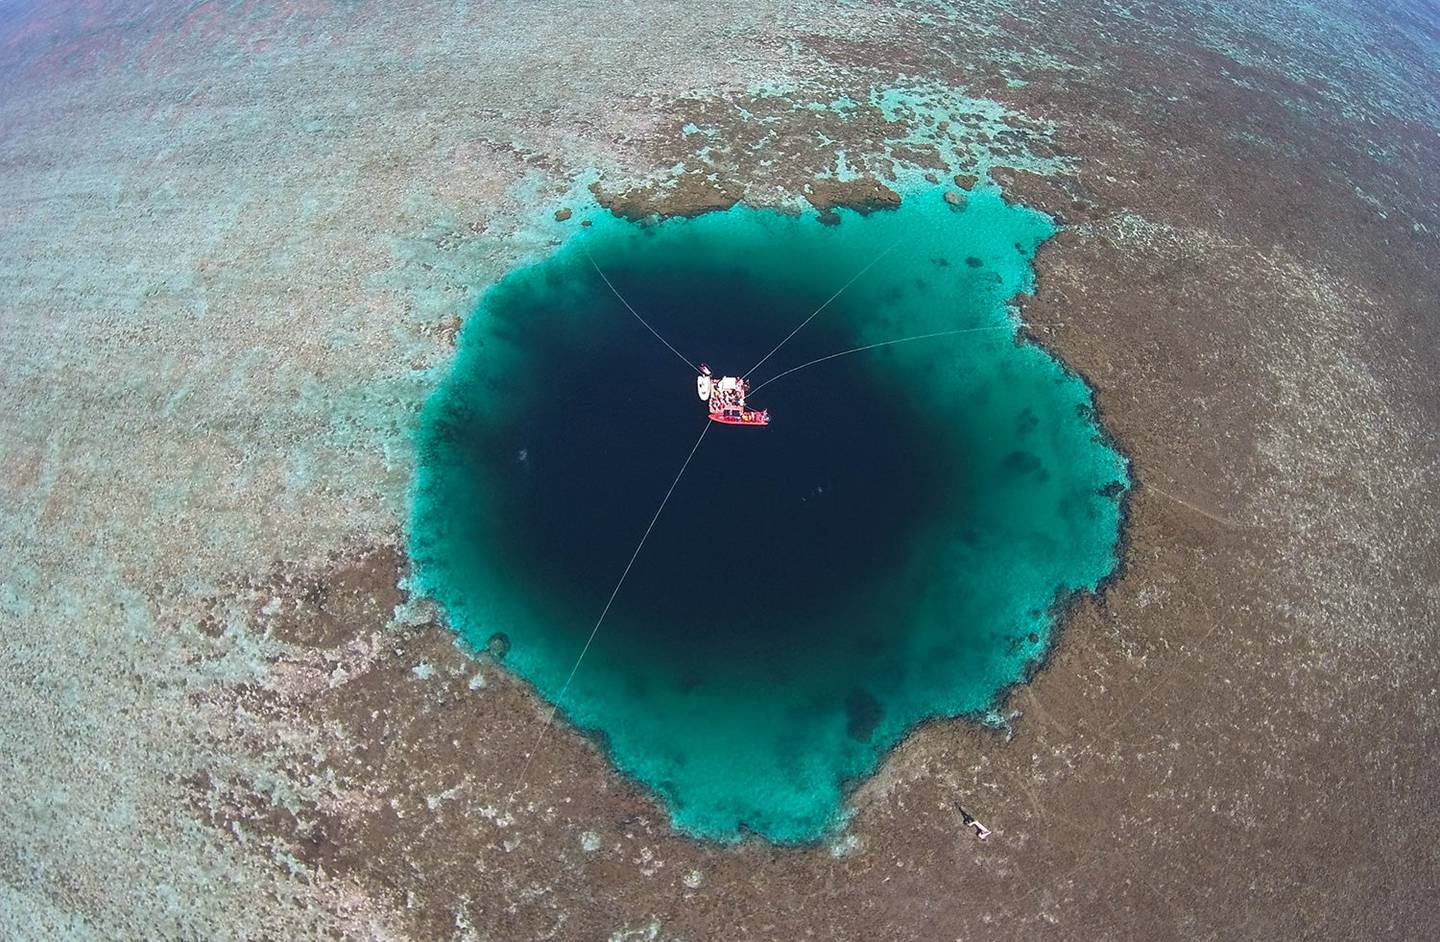 The worlds deepest blue hole is Dragon Hole in the South China Sea. Photo: Wikimedia